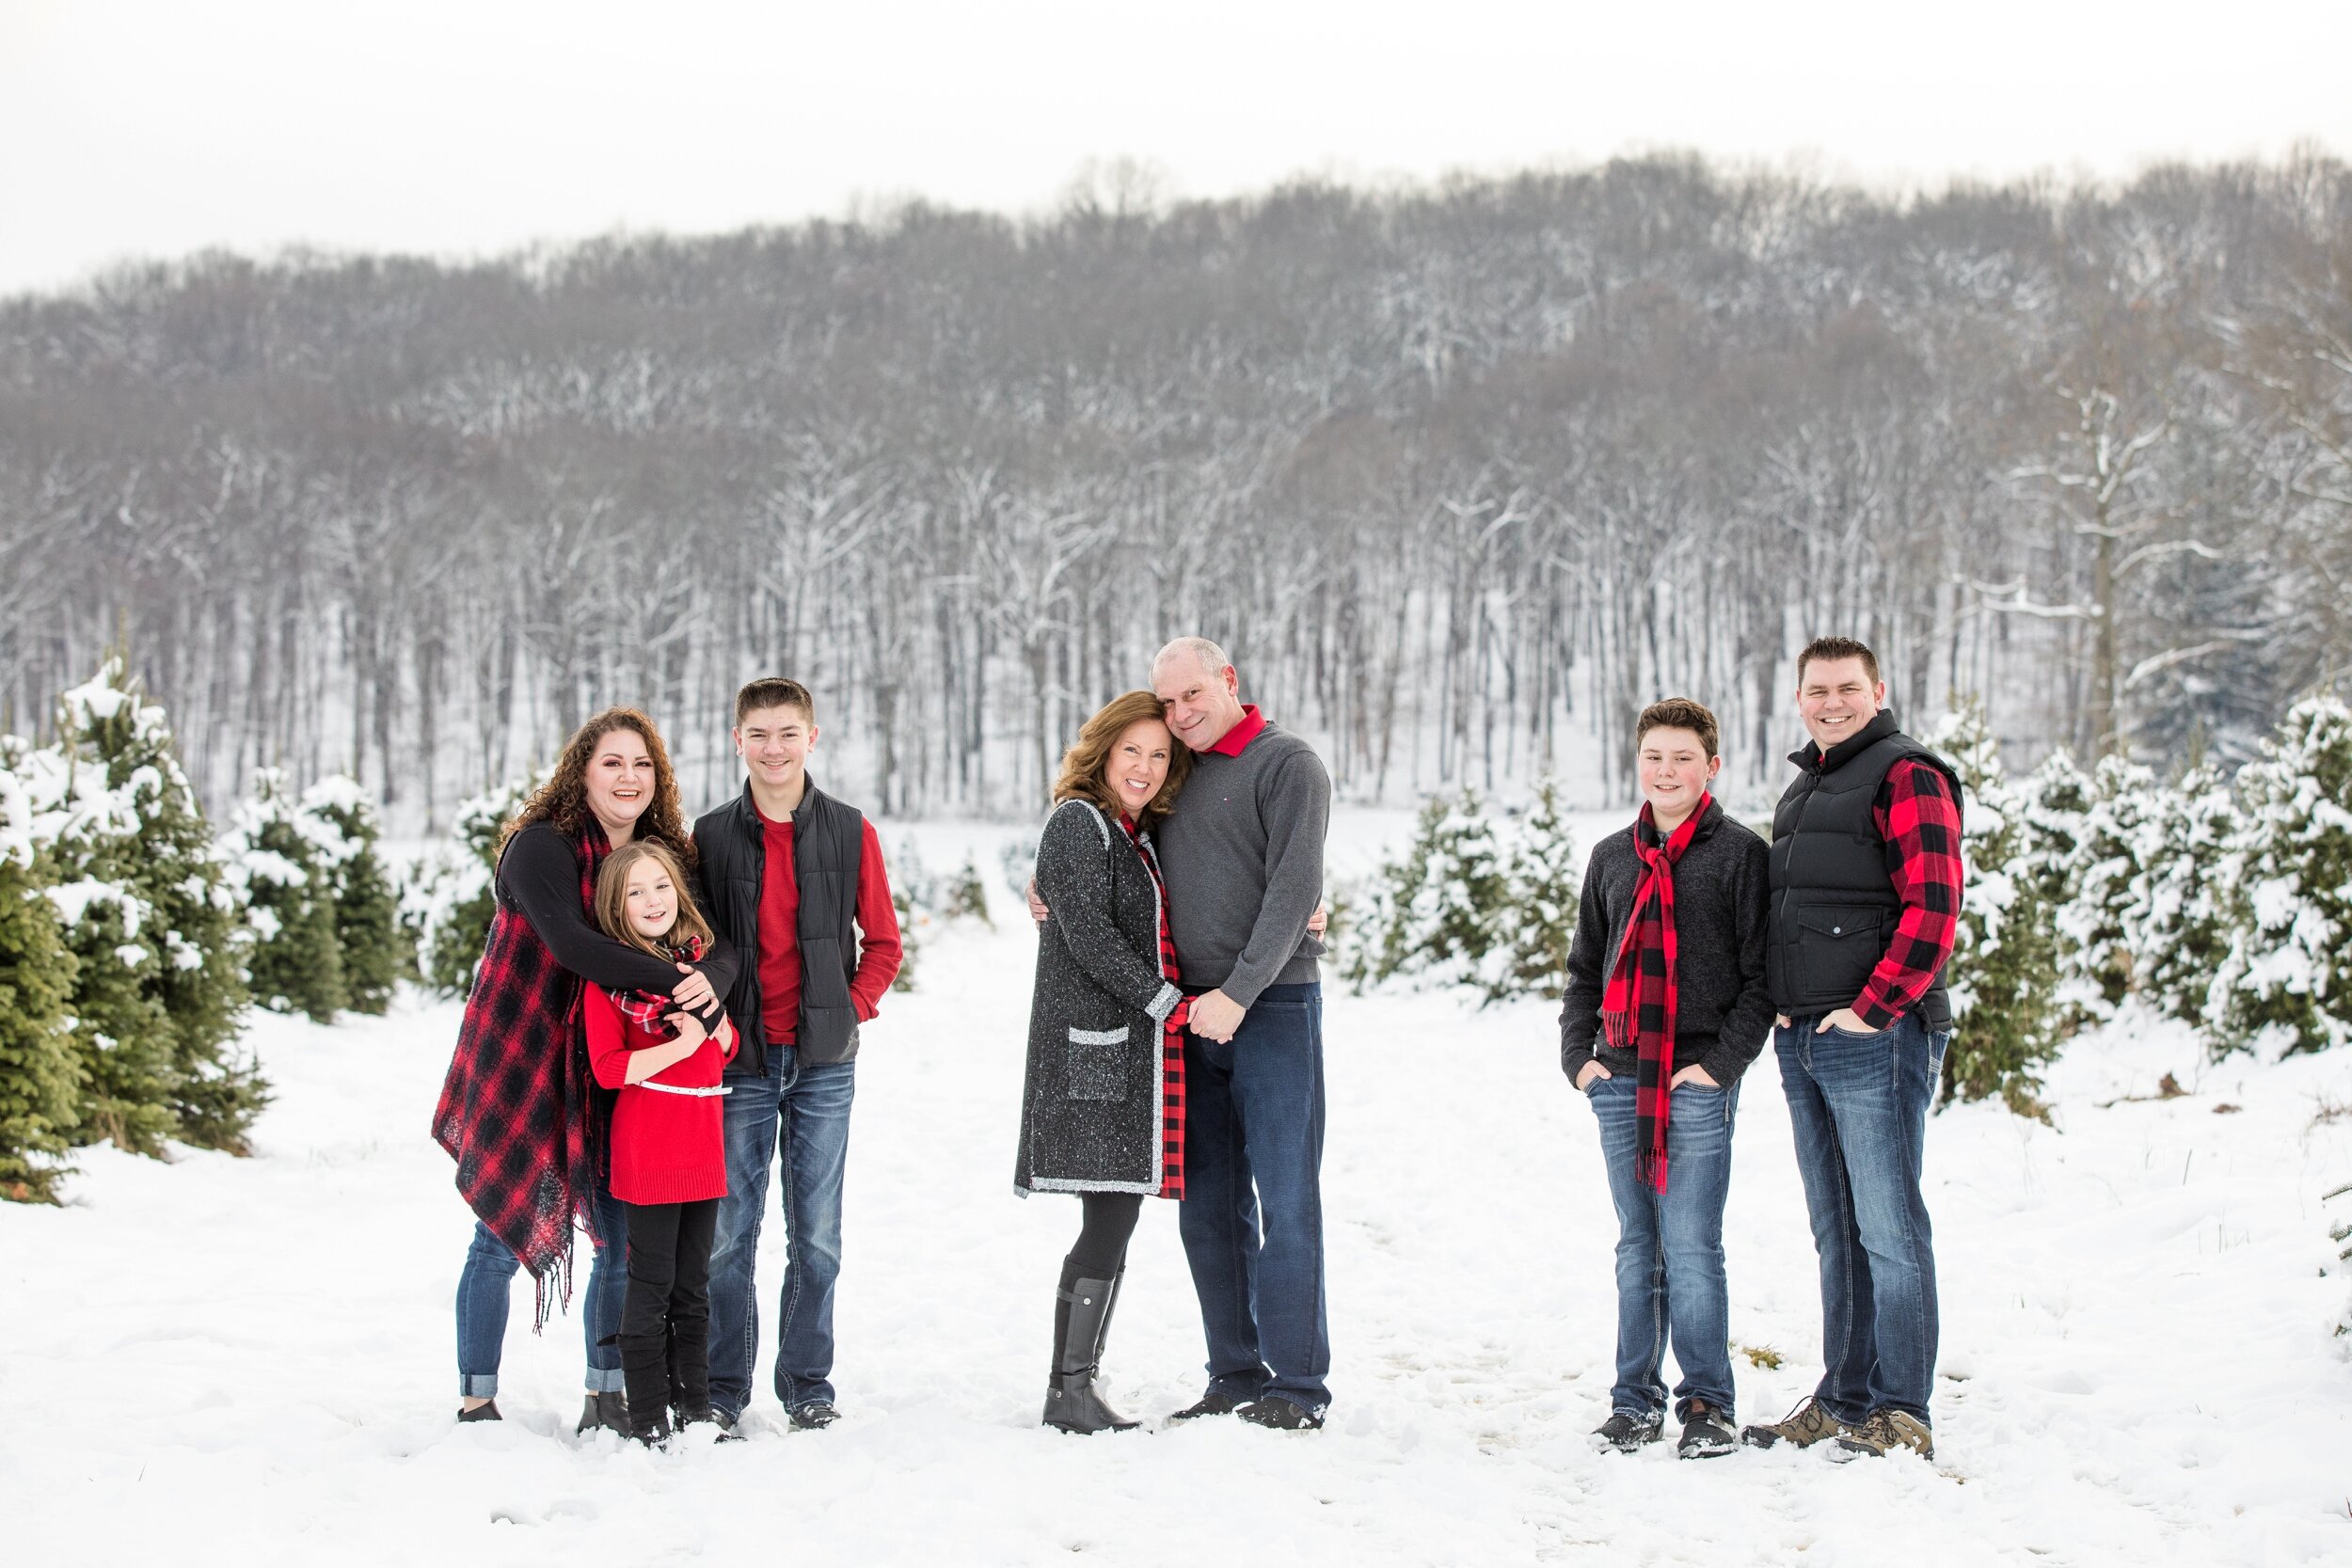 How to nail family Christmas photo? Fun photoshoot ideas |  allthestufficareabout.com